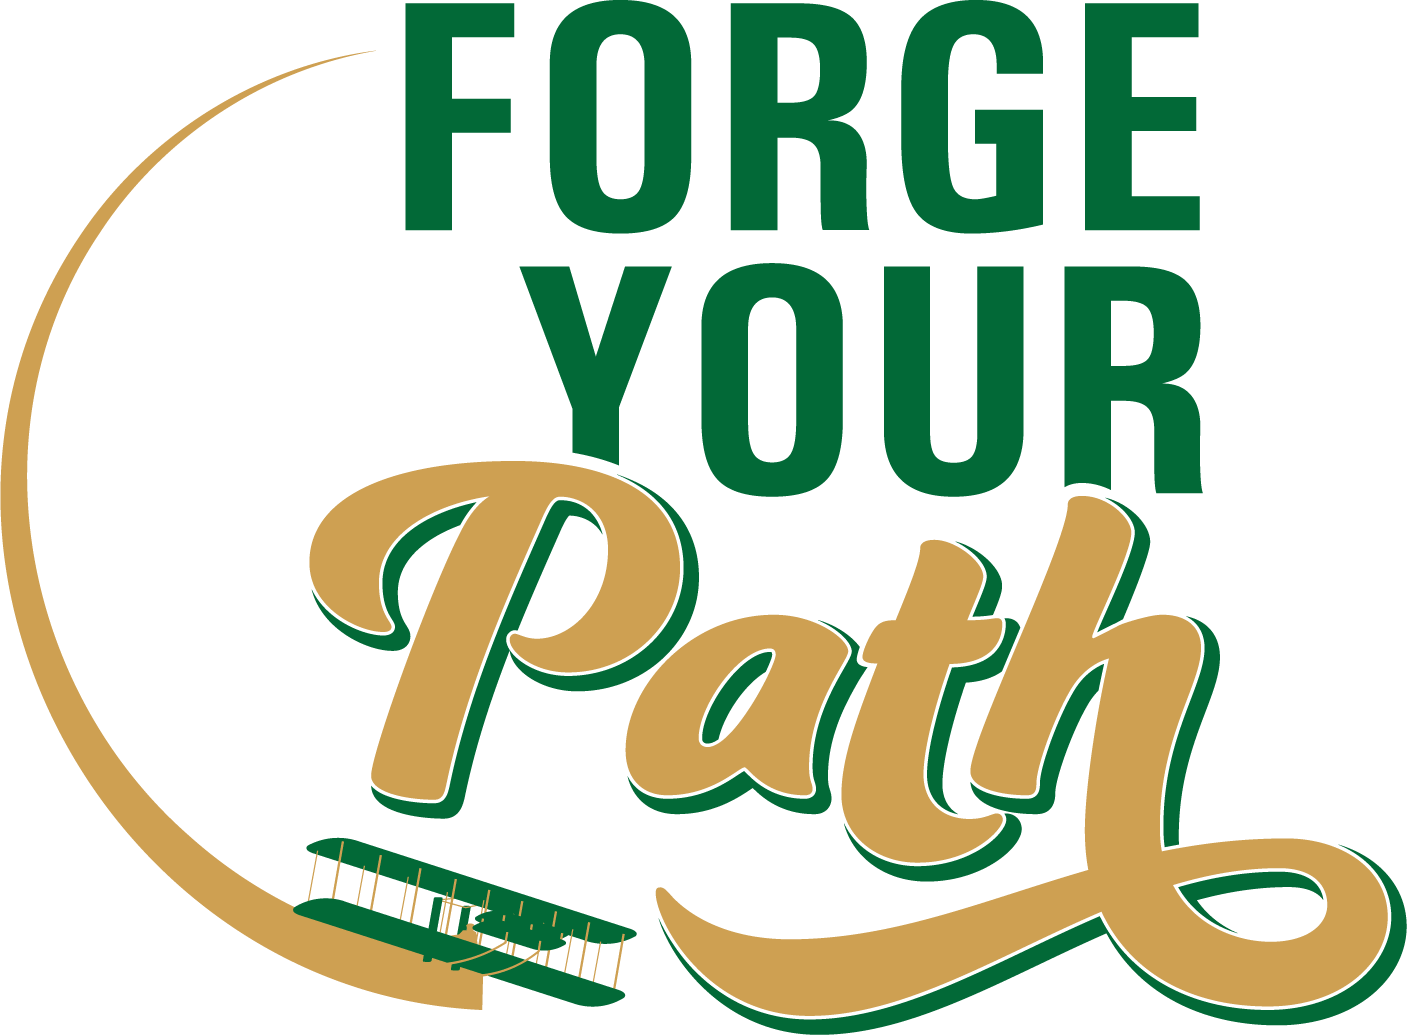 Forge your path